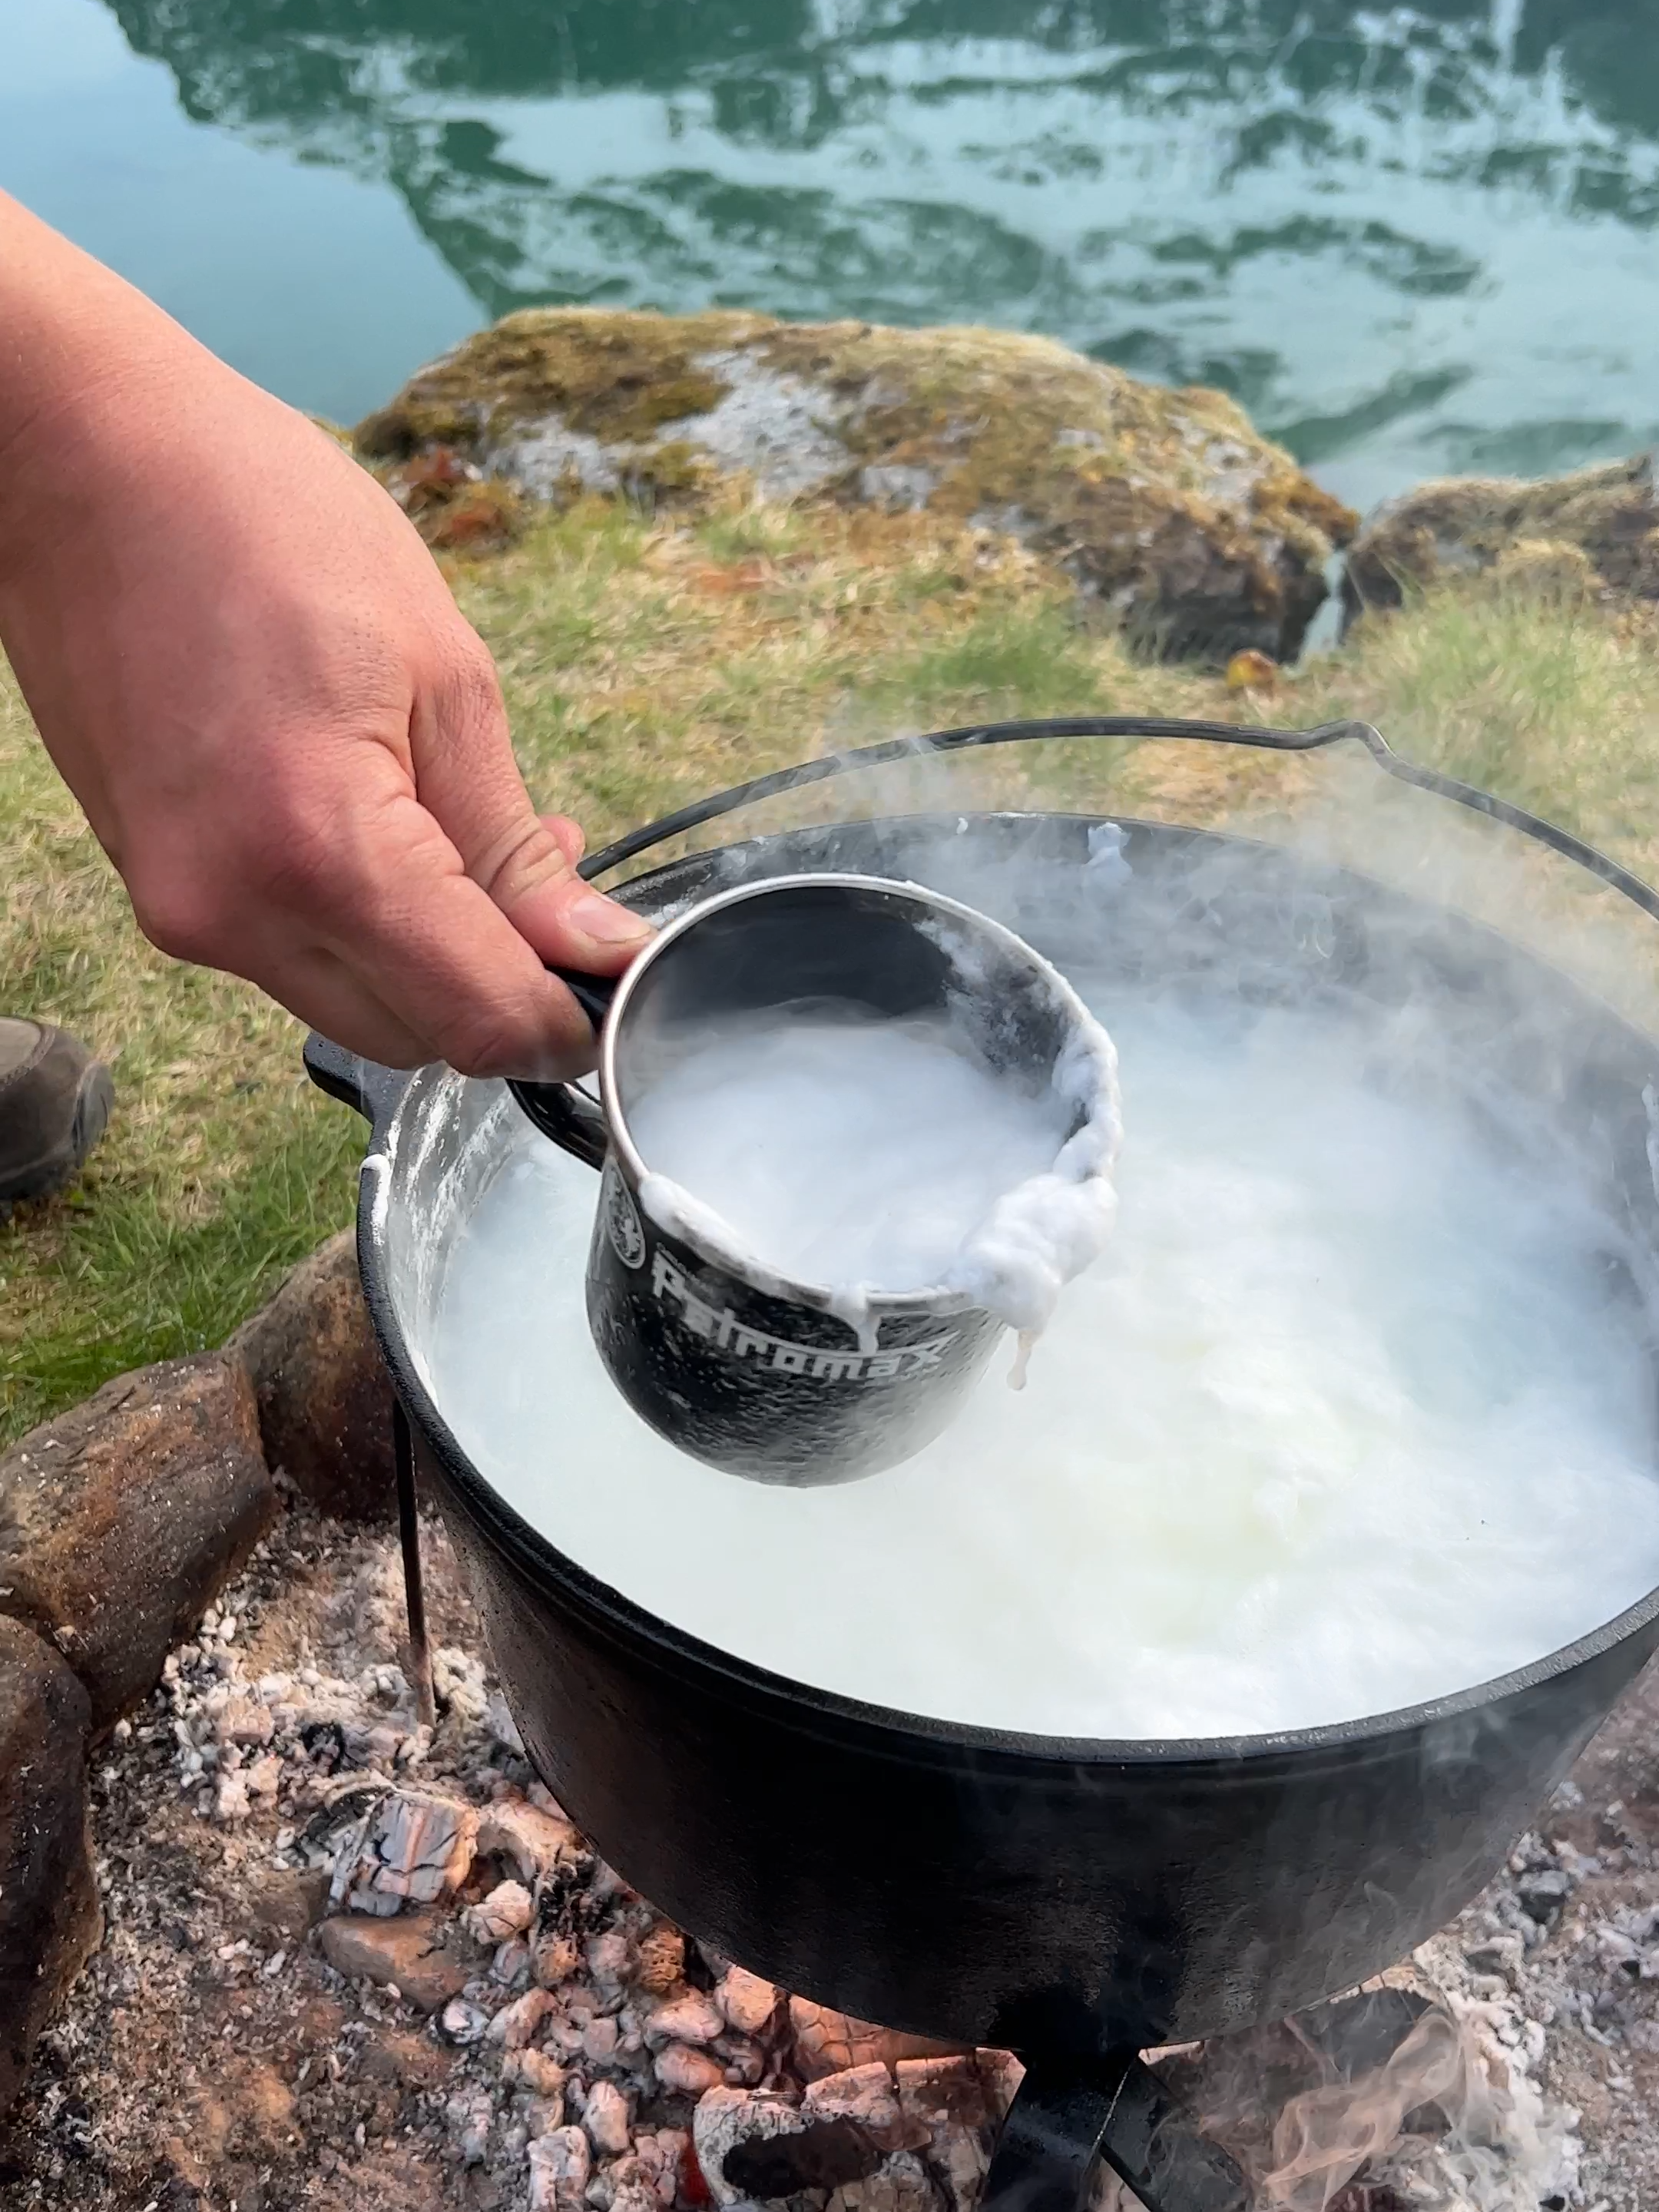 Dare to taste the mystery? First correct guess wins🤠🔥 #firekitchen #whatsinthepot #outdoorcooking